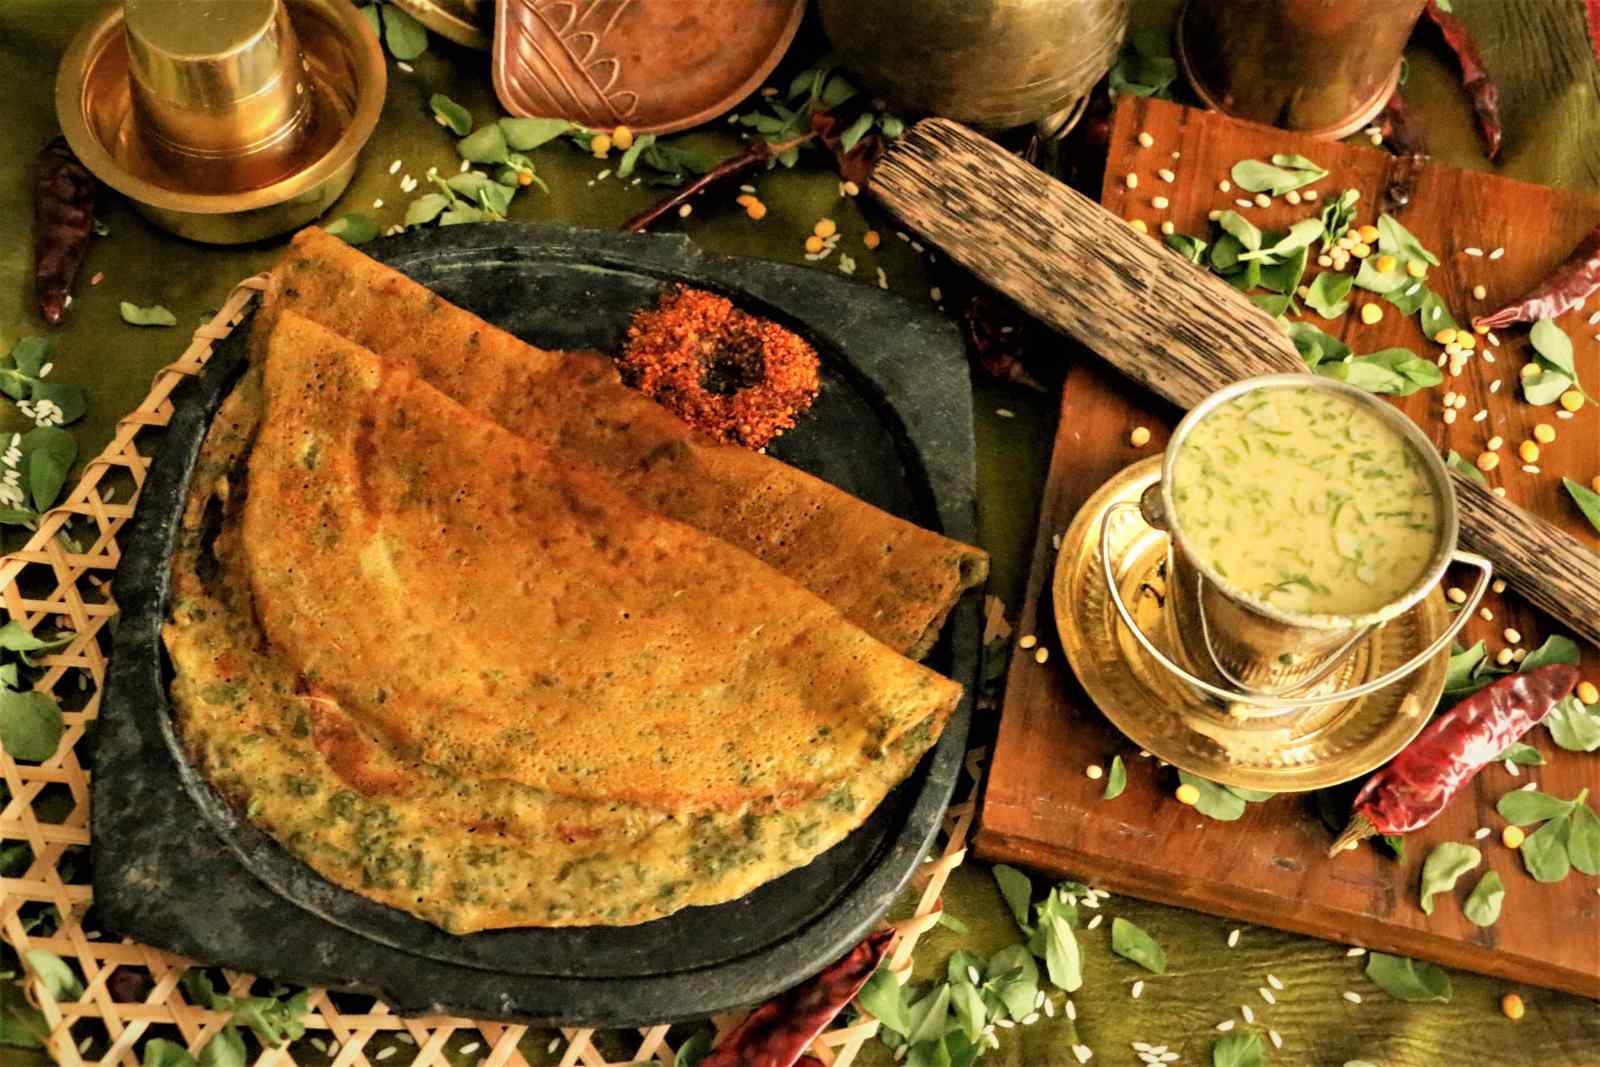 Menthya Dose (Dosa Recipe With Methi Leaves)